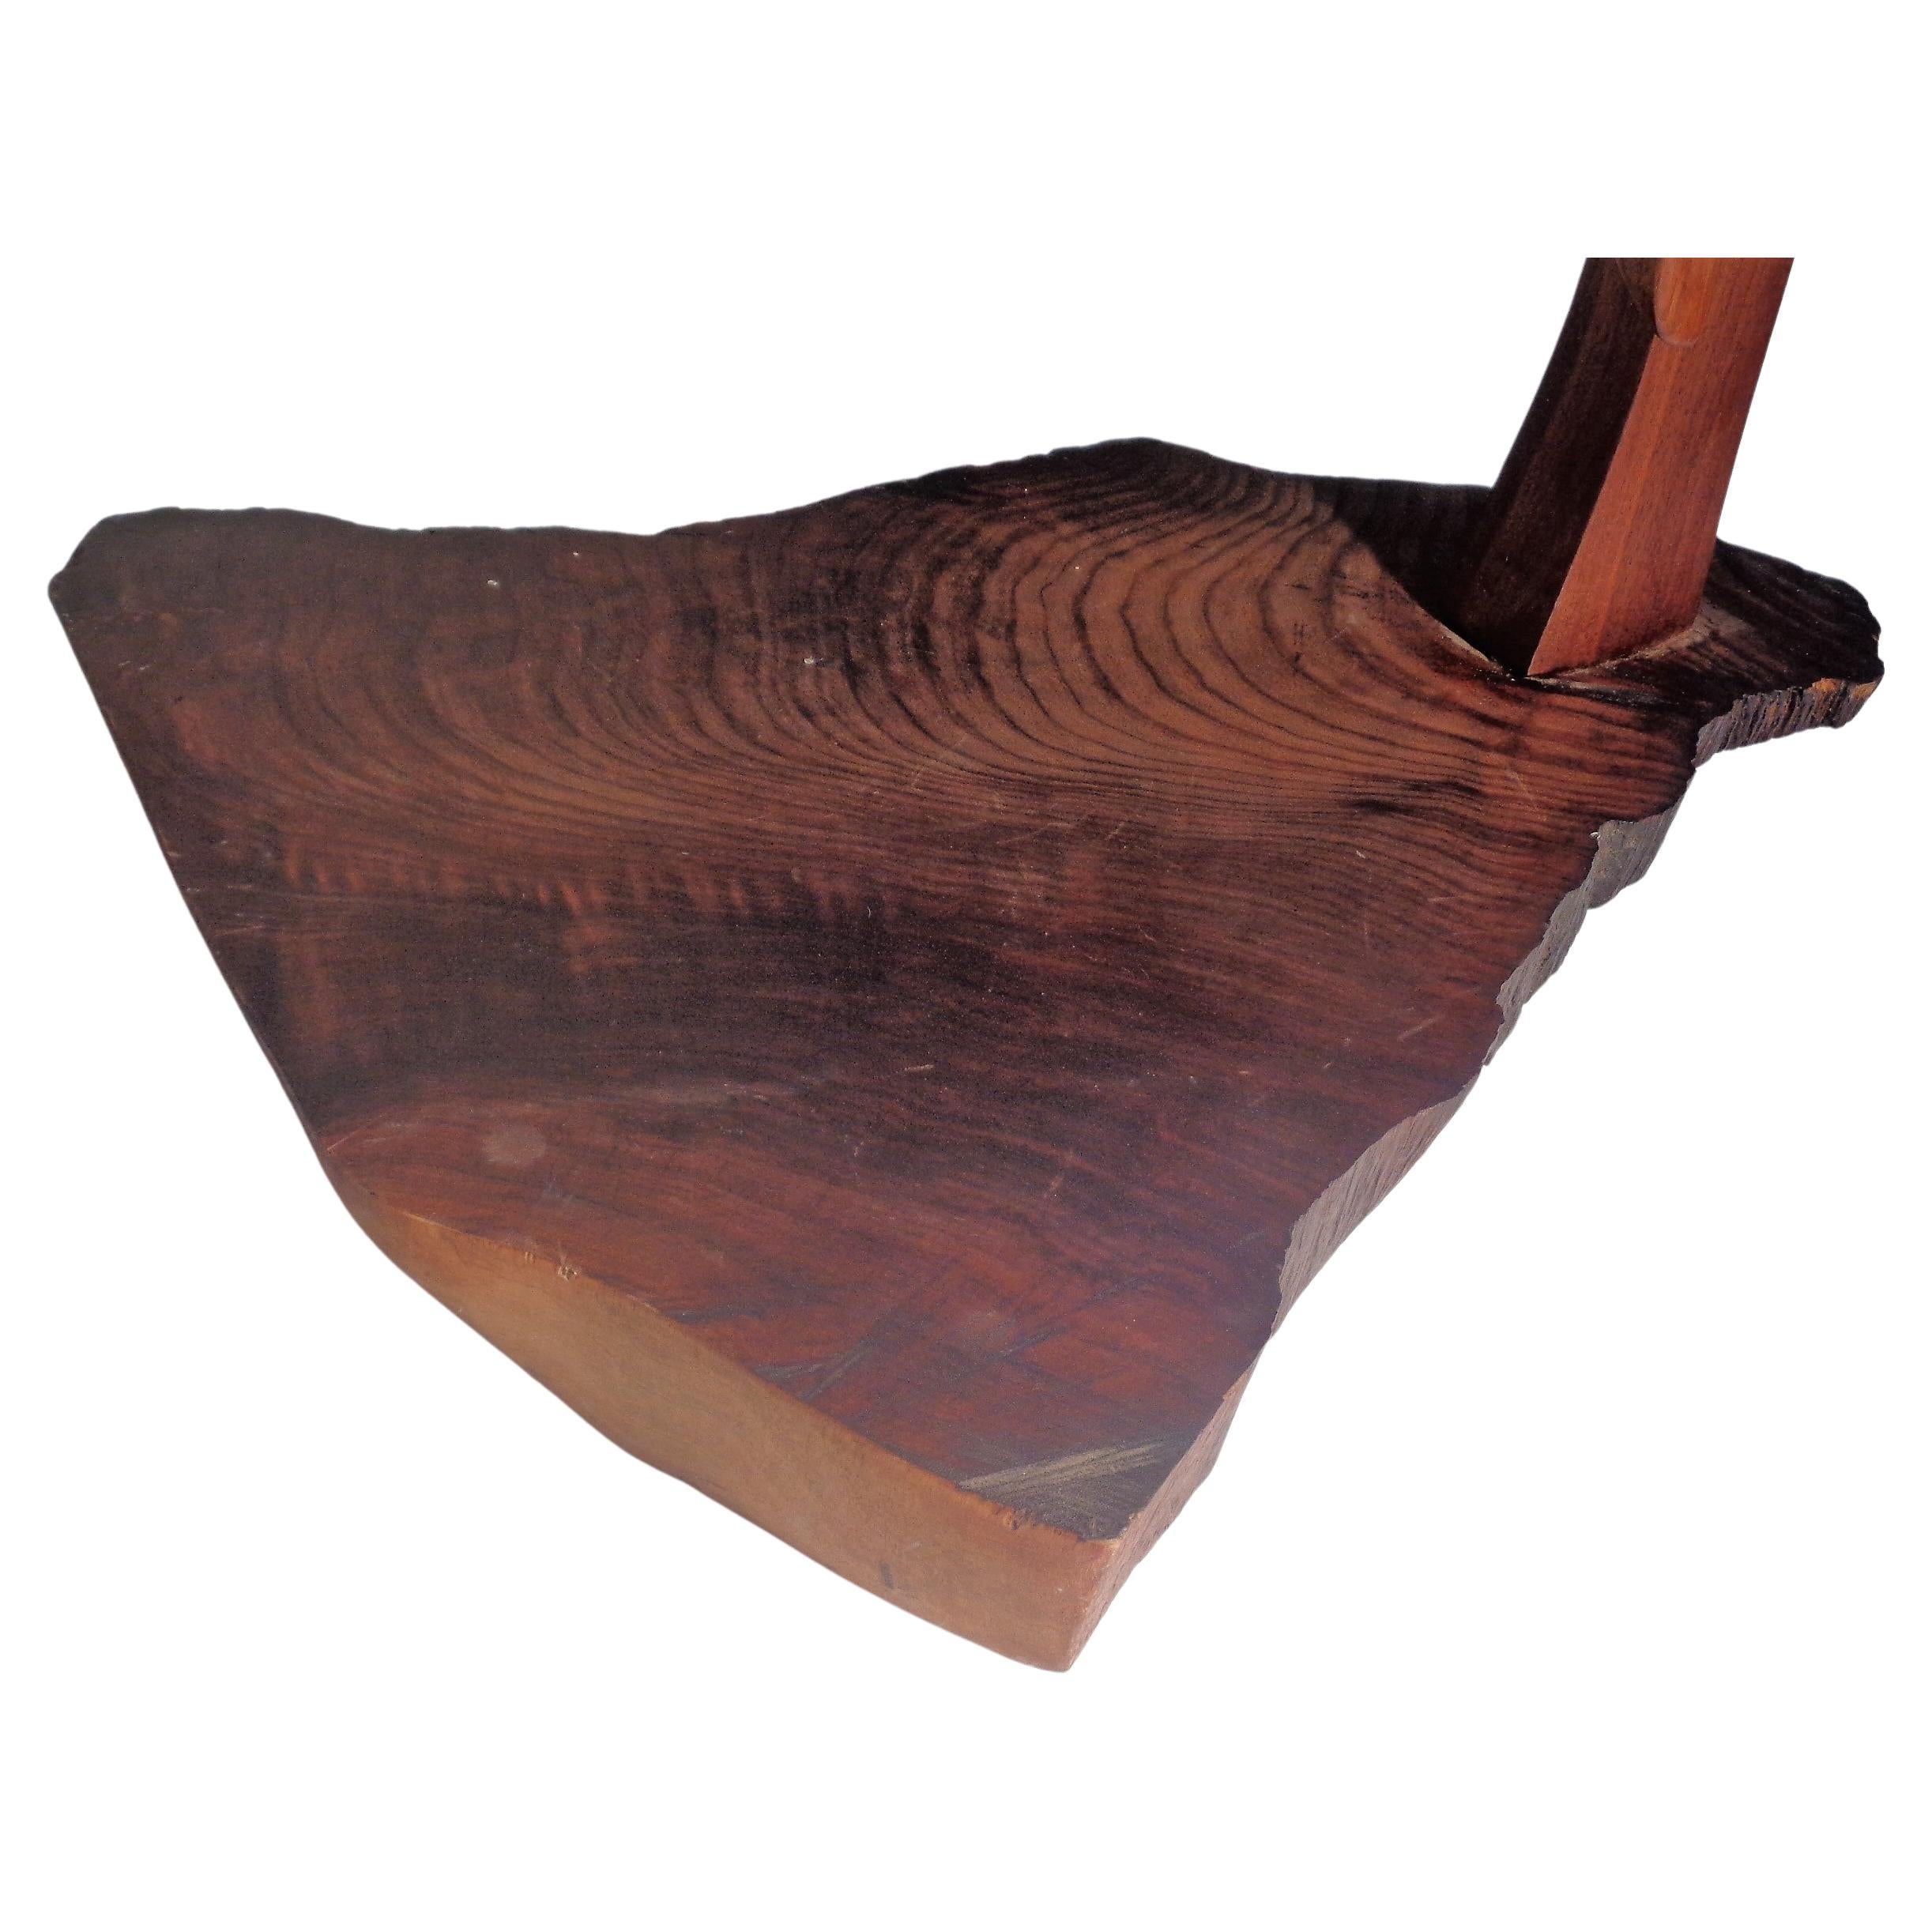 American Studio Craft Movement Modernist Abstract Wood Sculpture, 1970-1980 For Sale 4